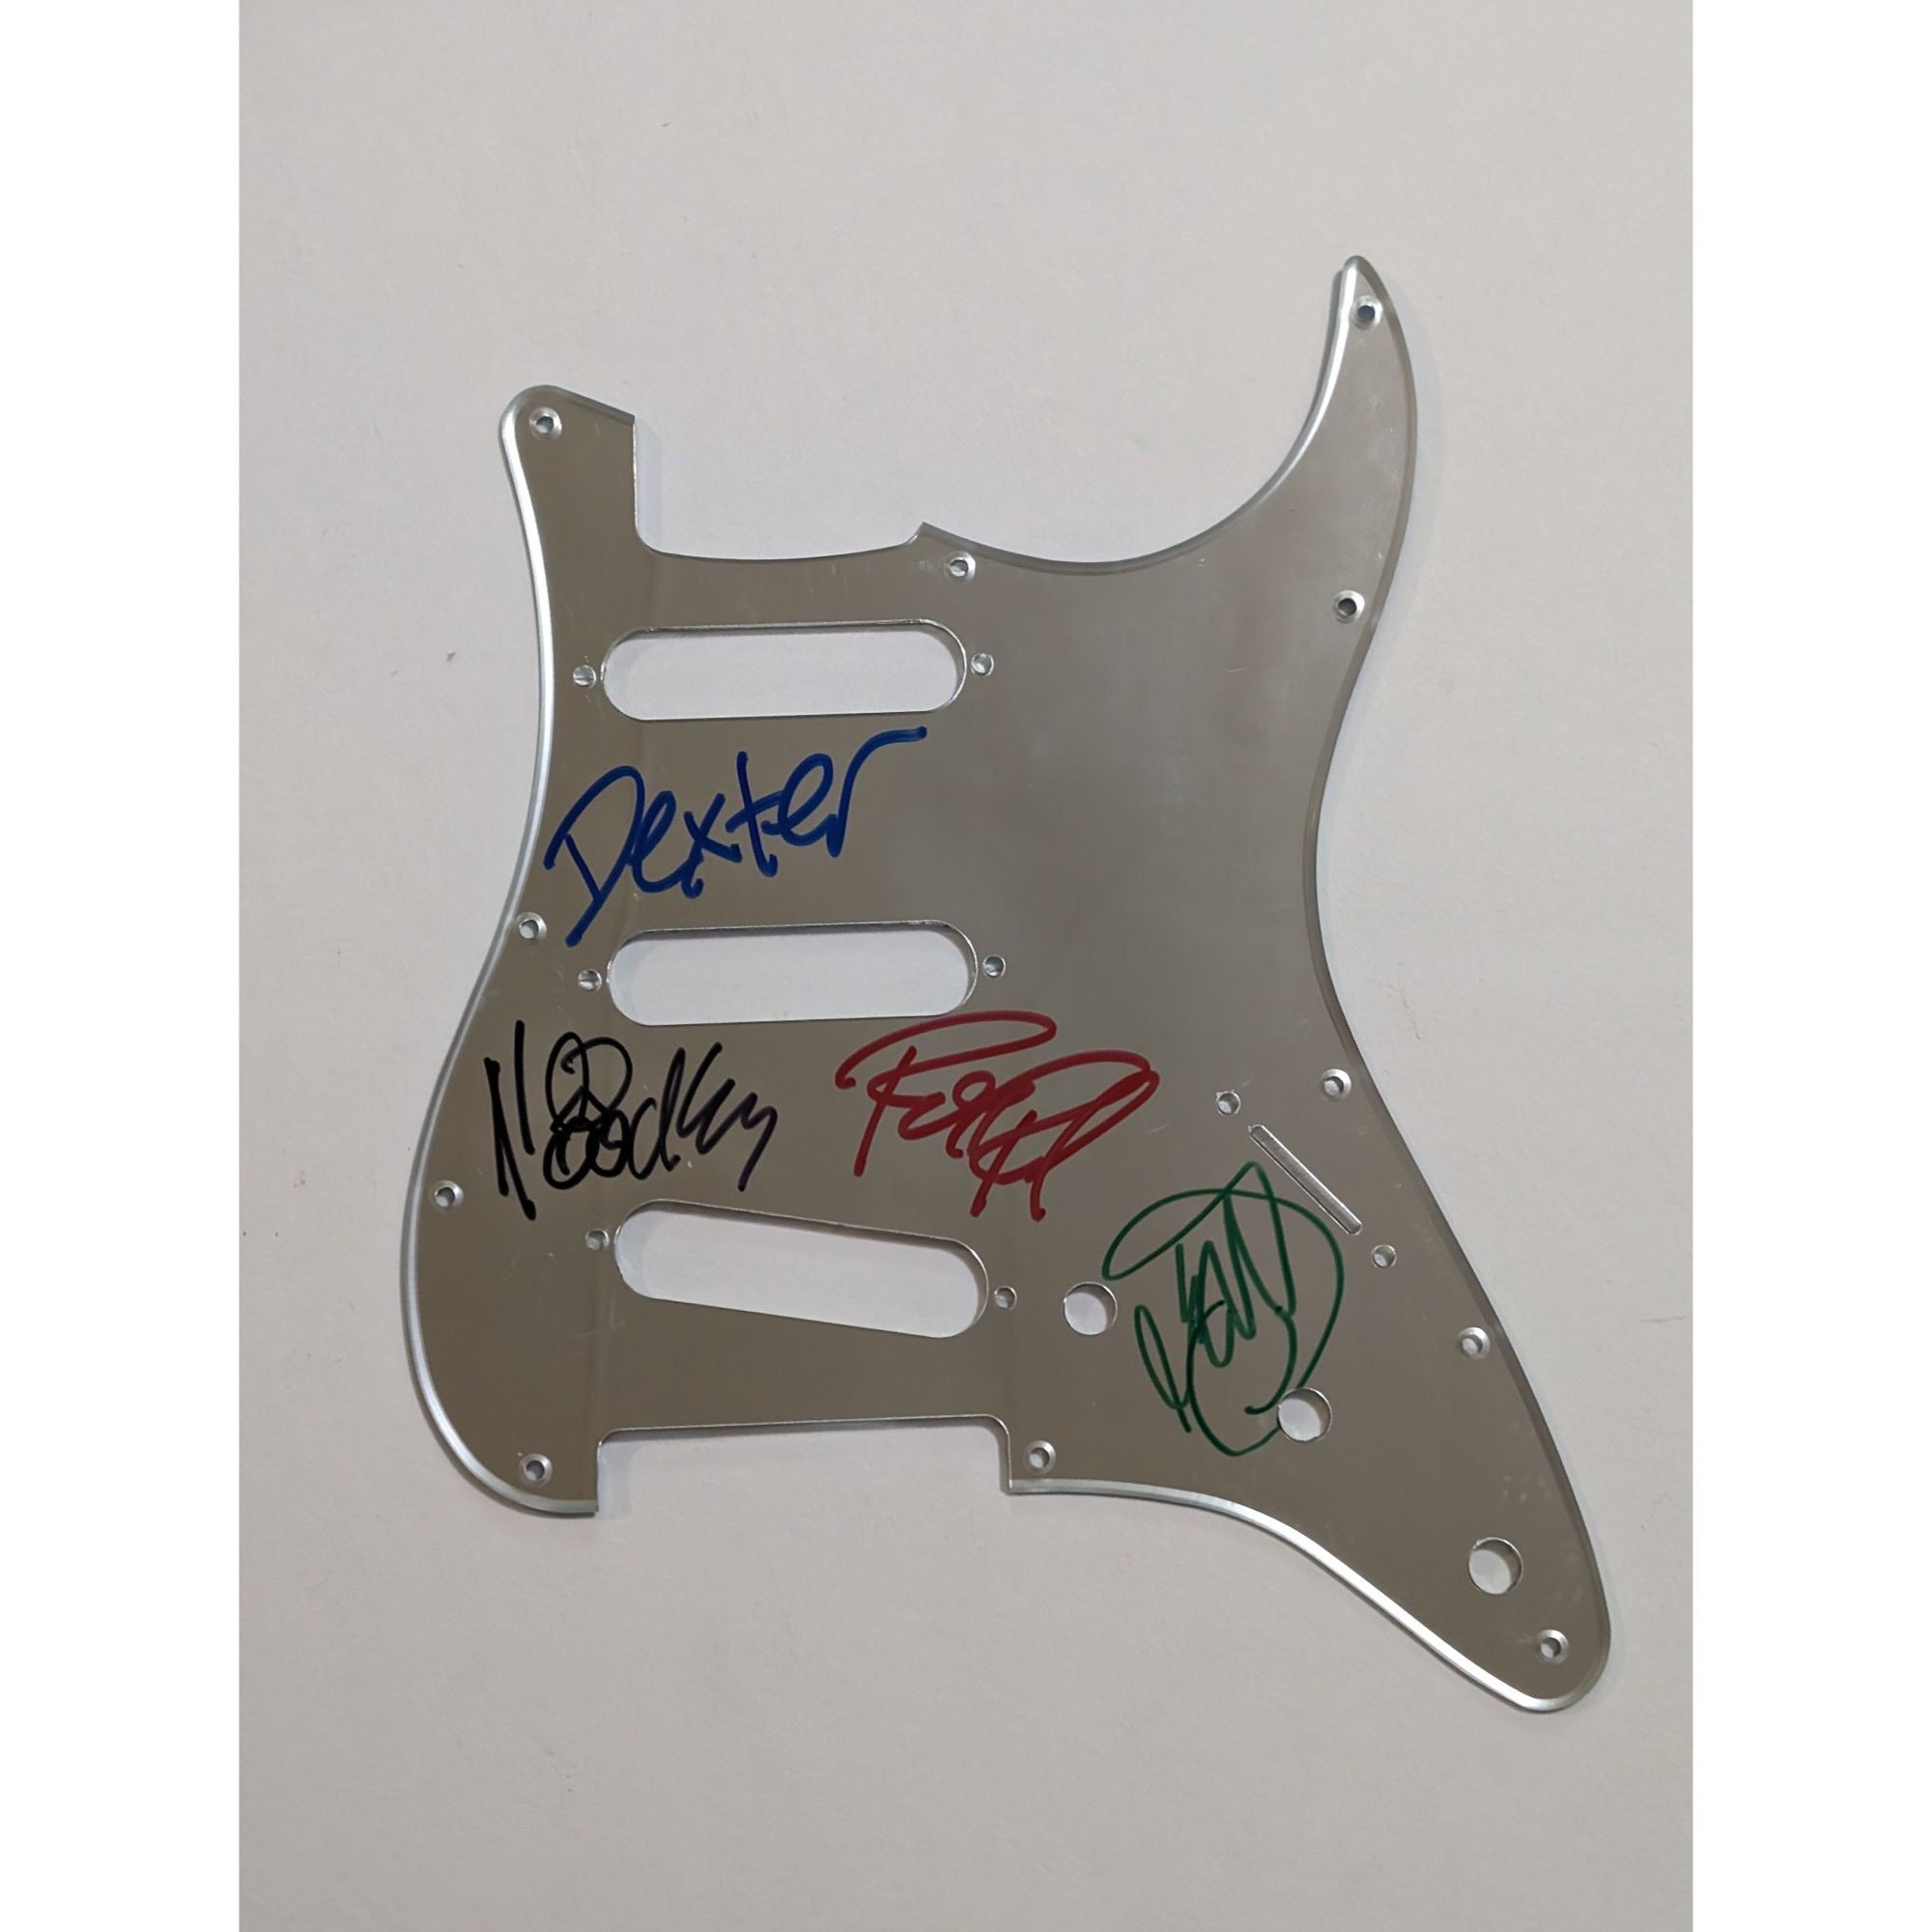 The Offspring Dexter Holland Noodles  Fender Stratocaster electric guitar pick guard signed with proof